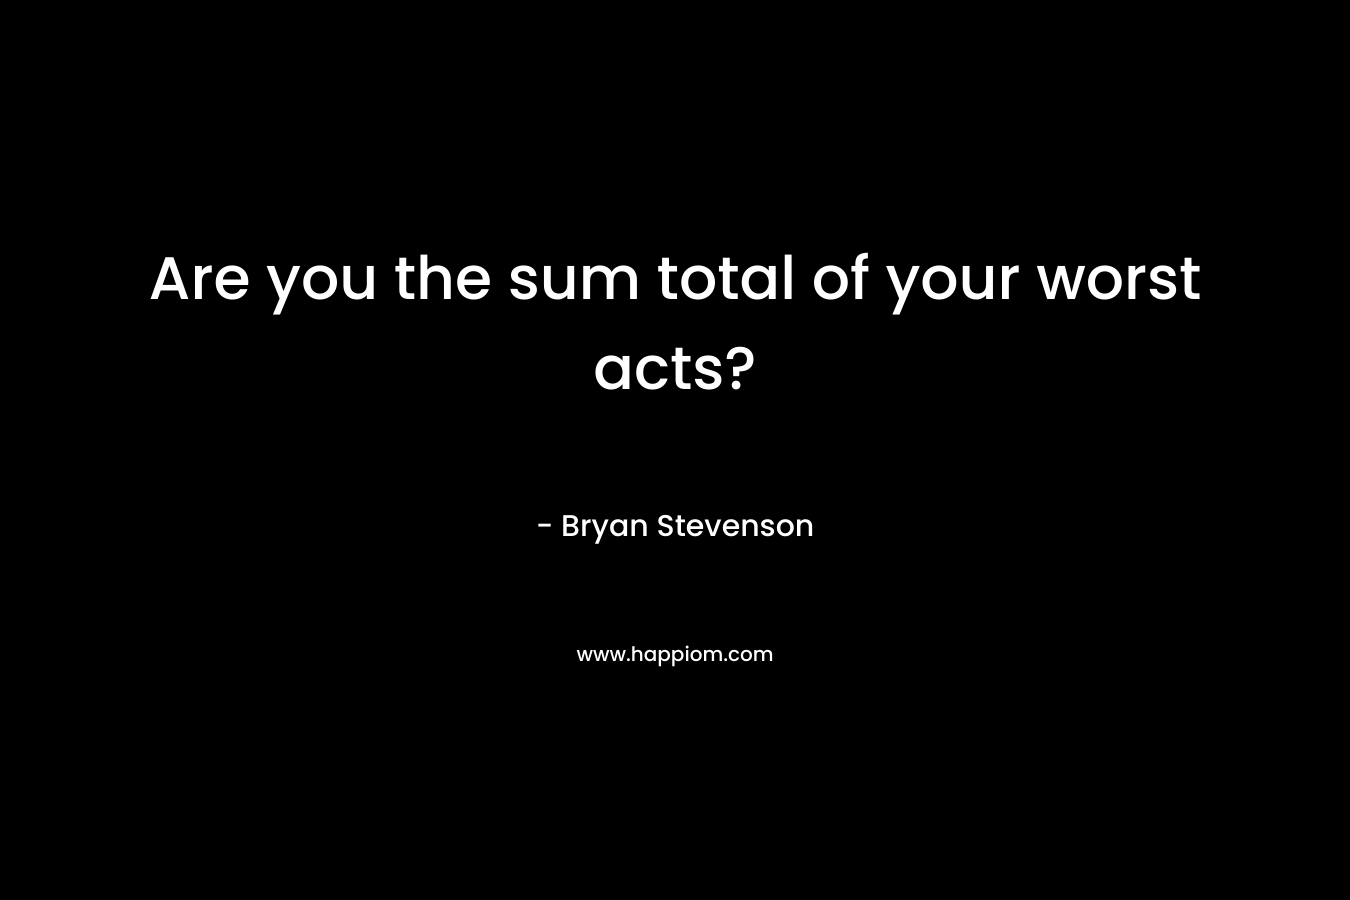 Are you the sum total of your worst acts?